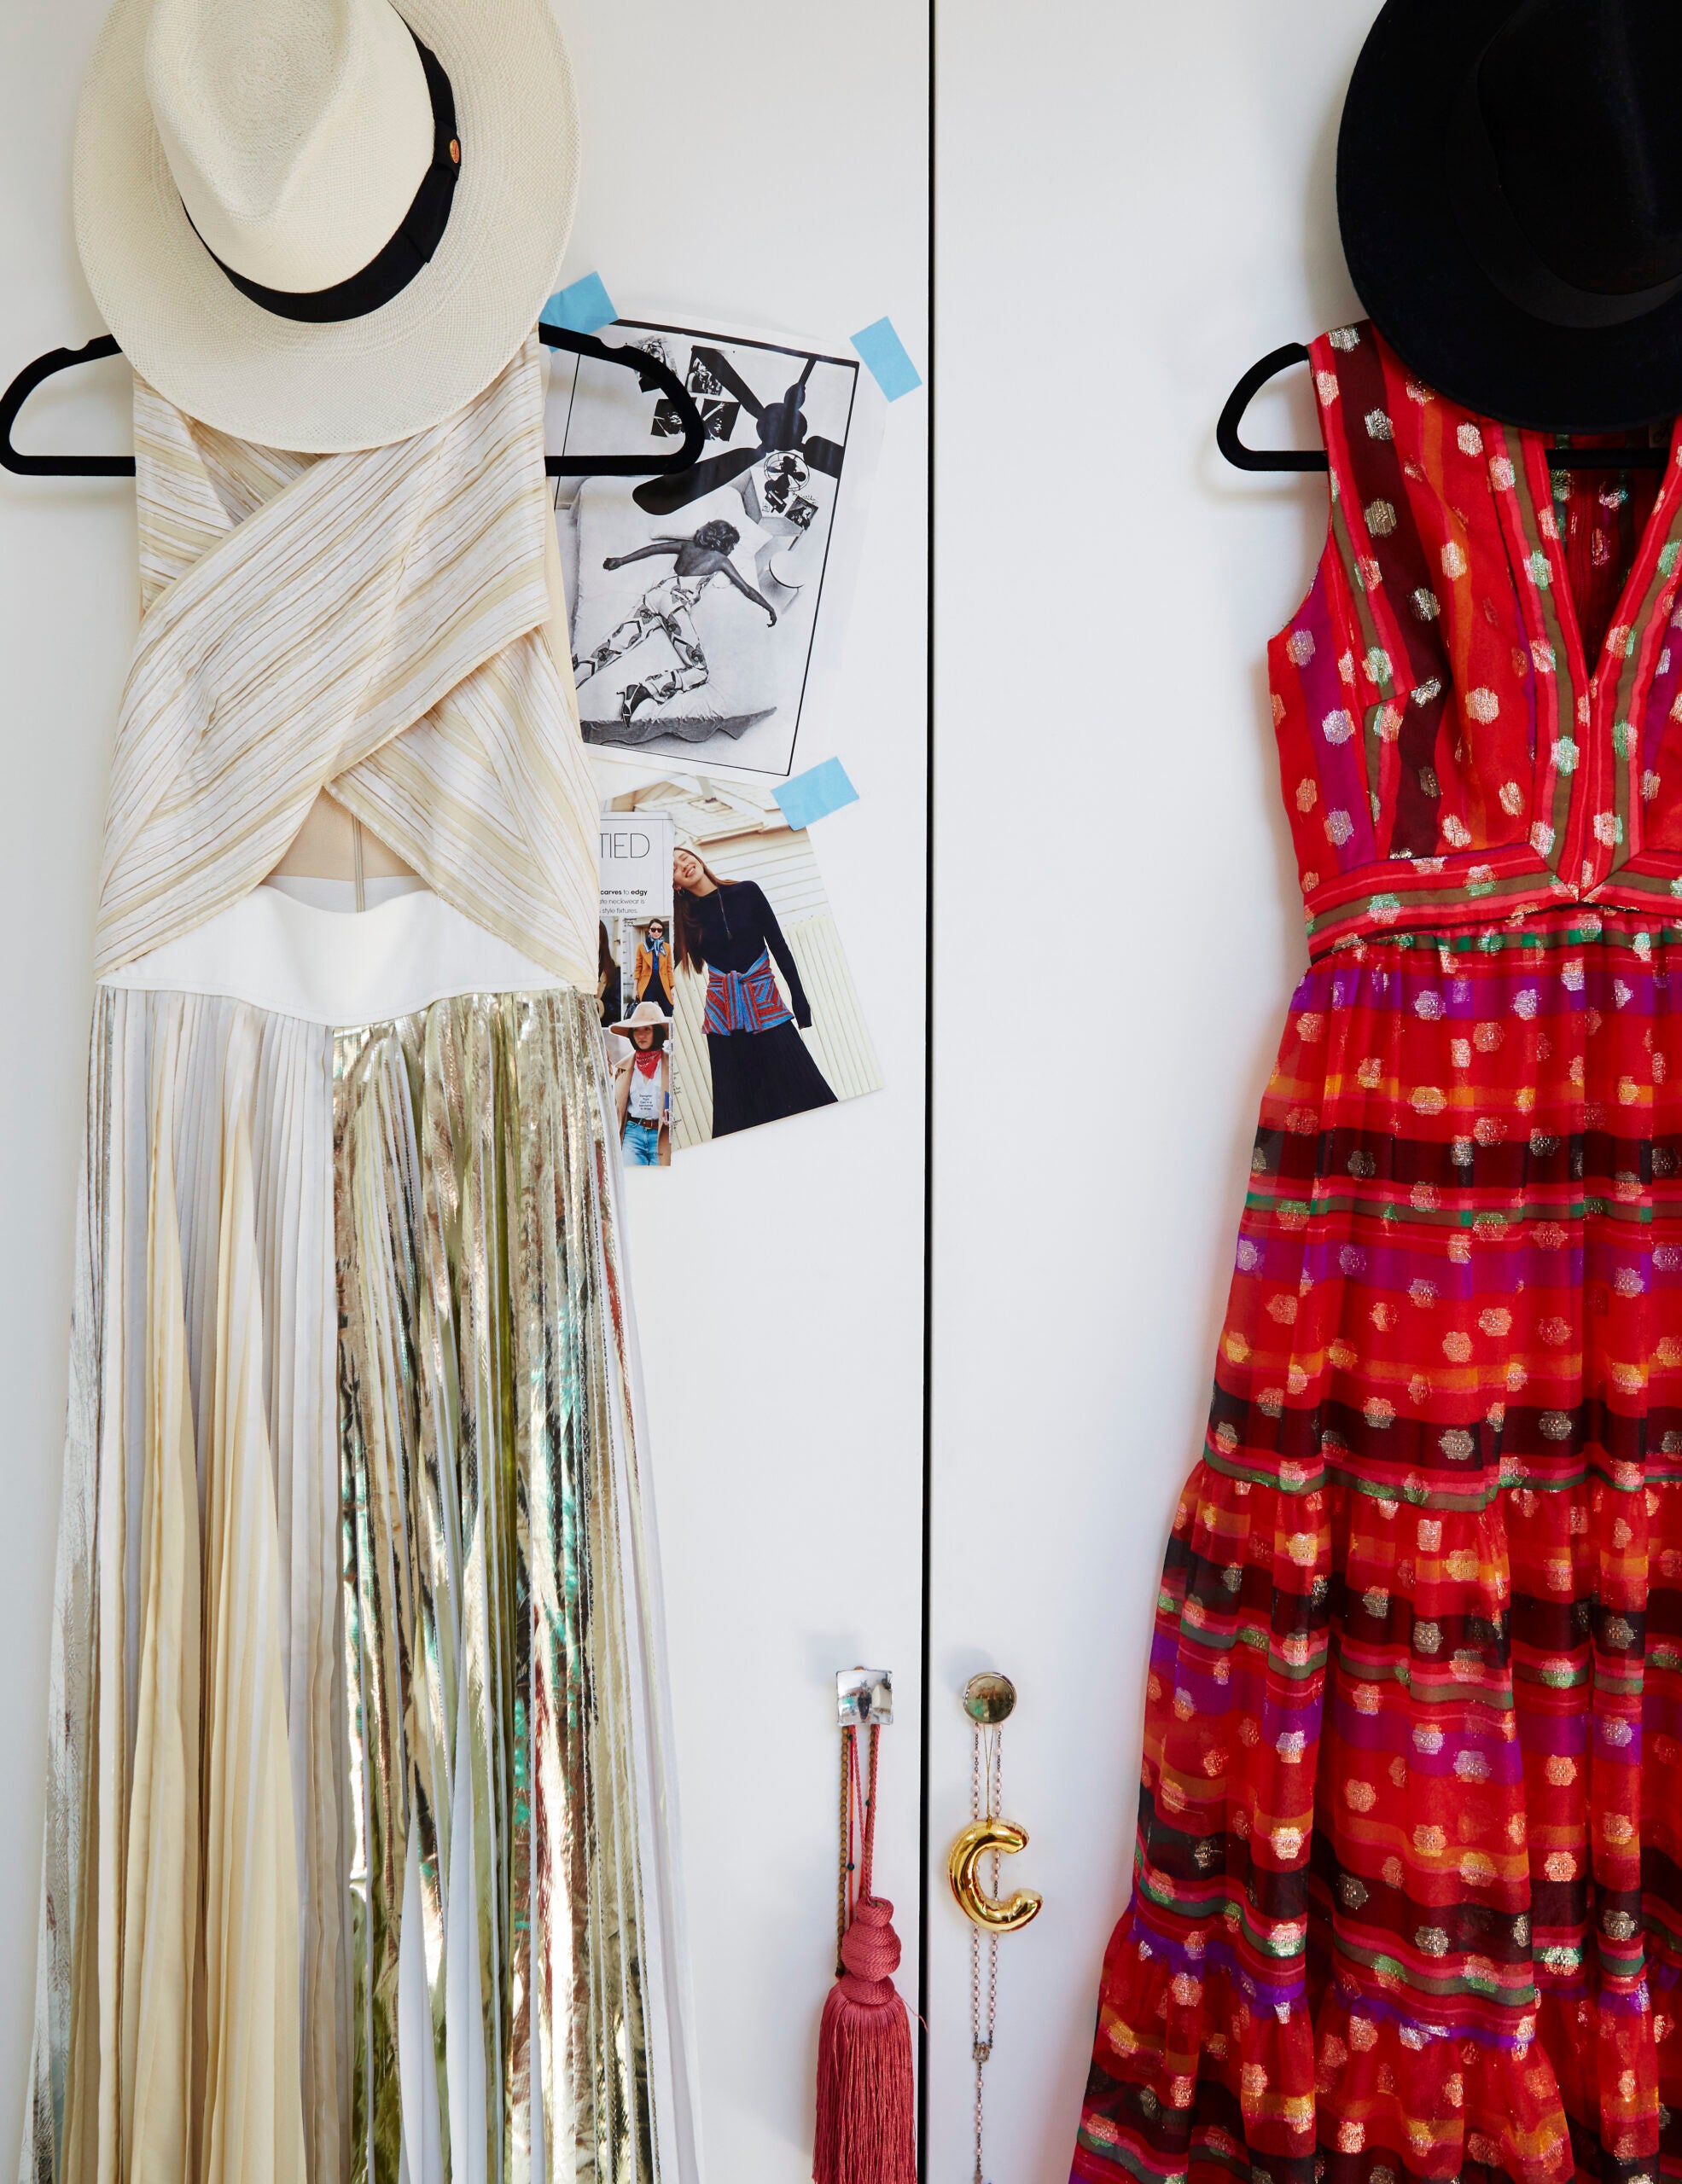 In Christene Barberich’s Brooklyn Haven, Vintage Finds and Natural Light Are Tailored To Fit